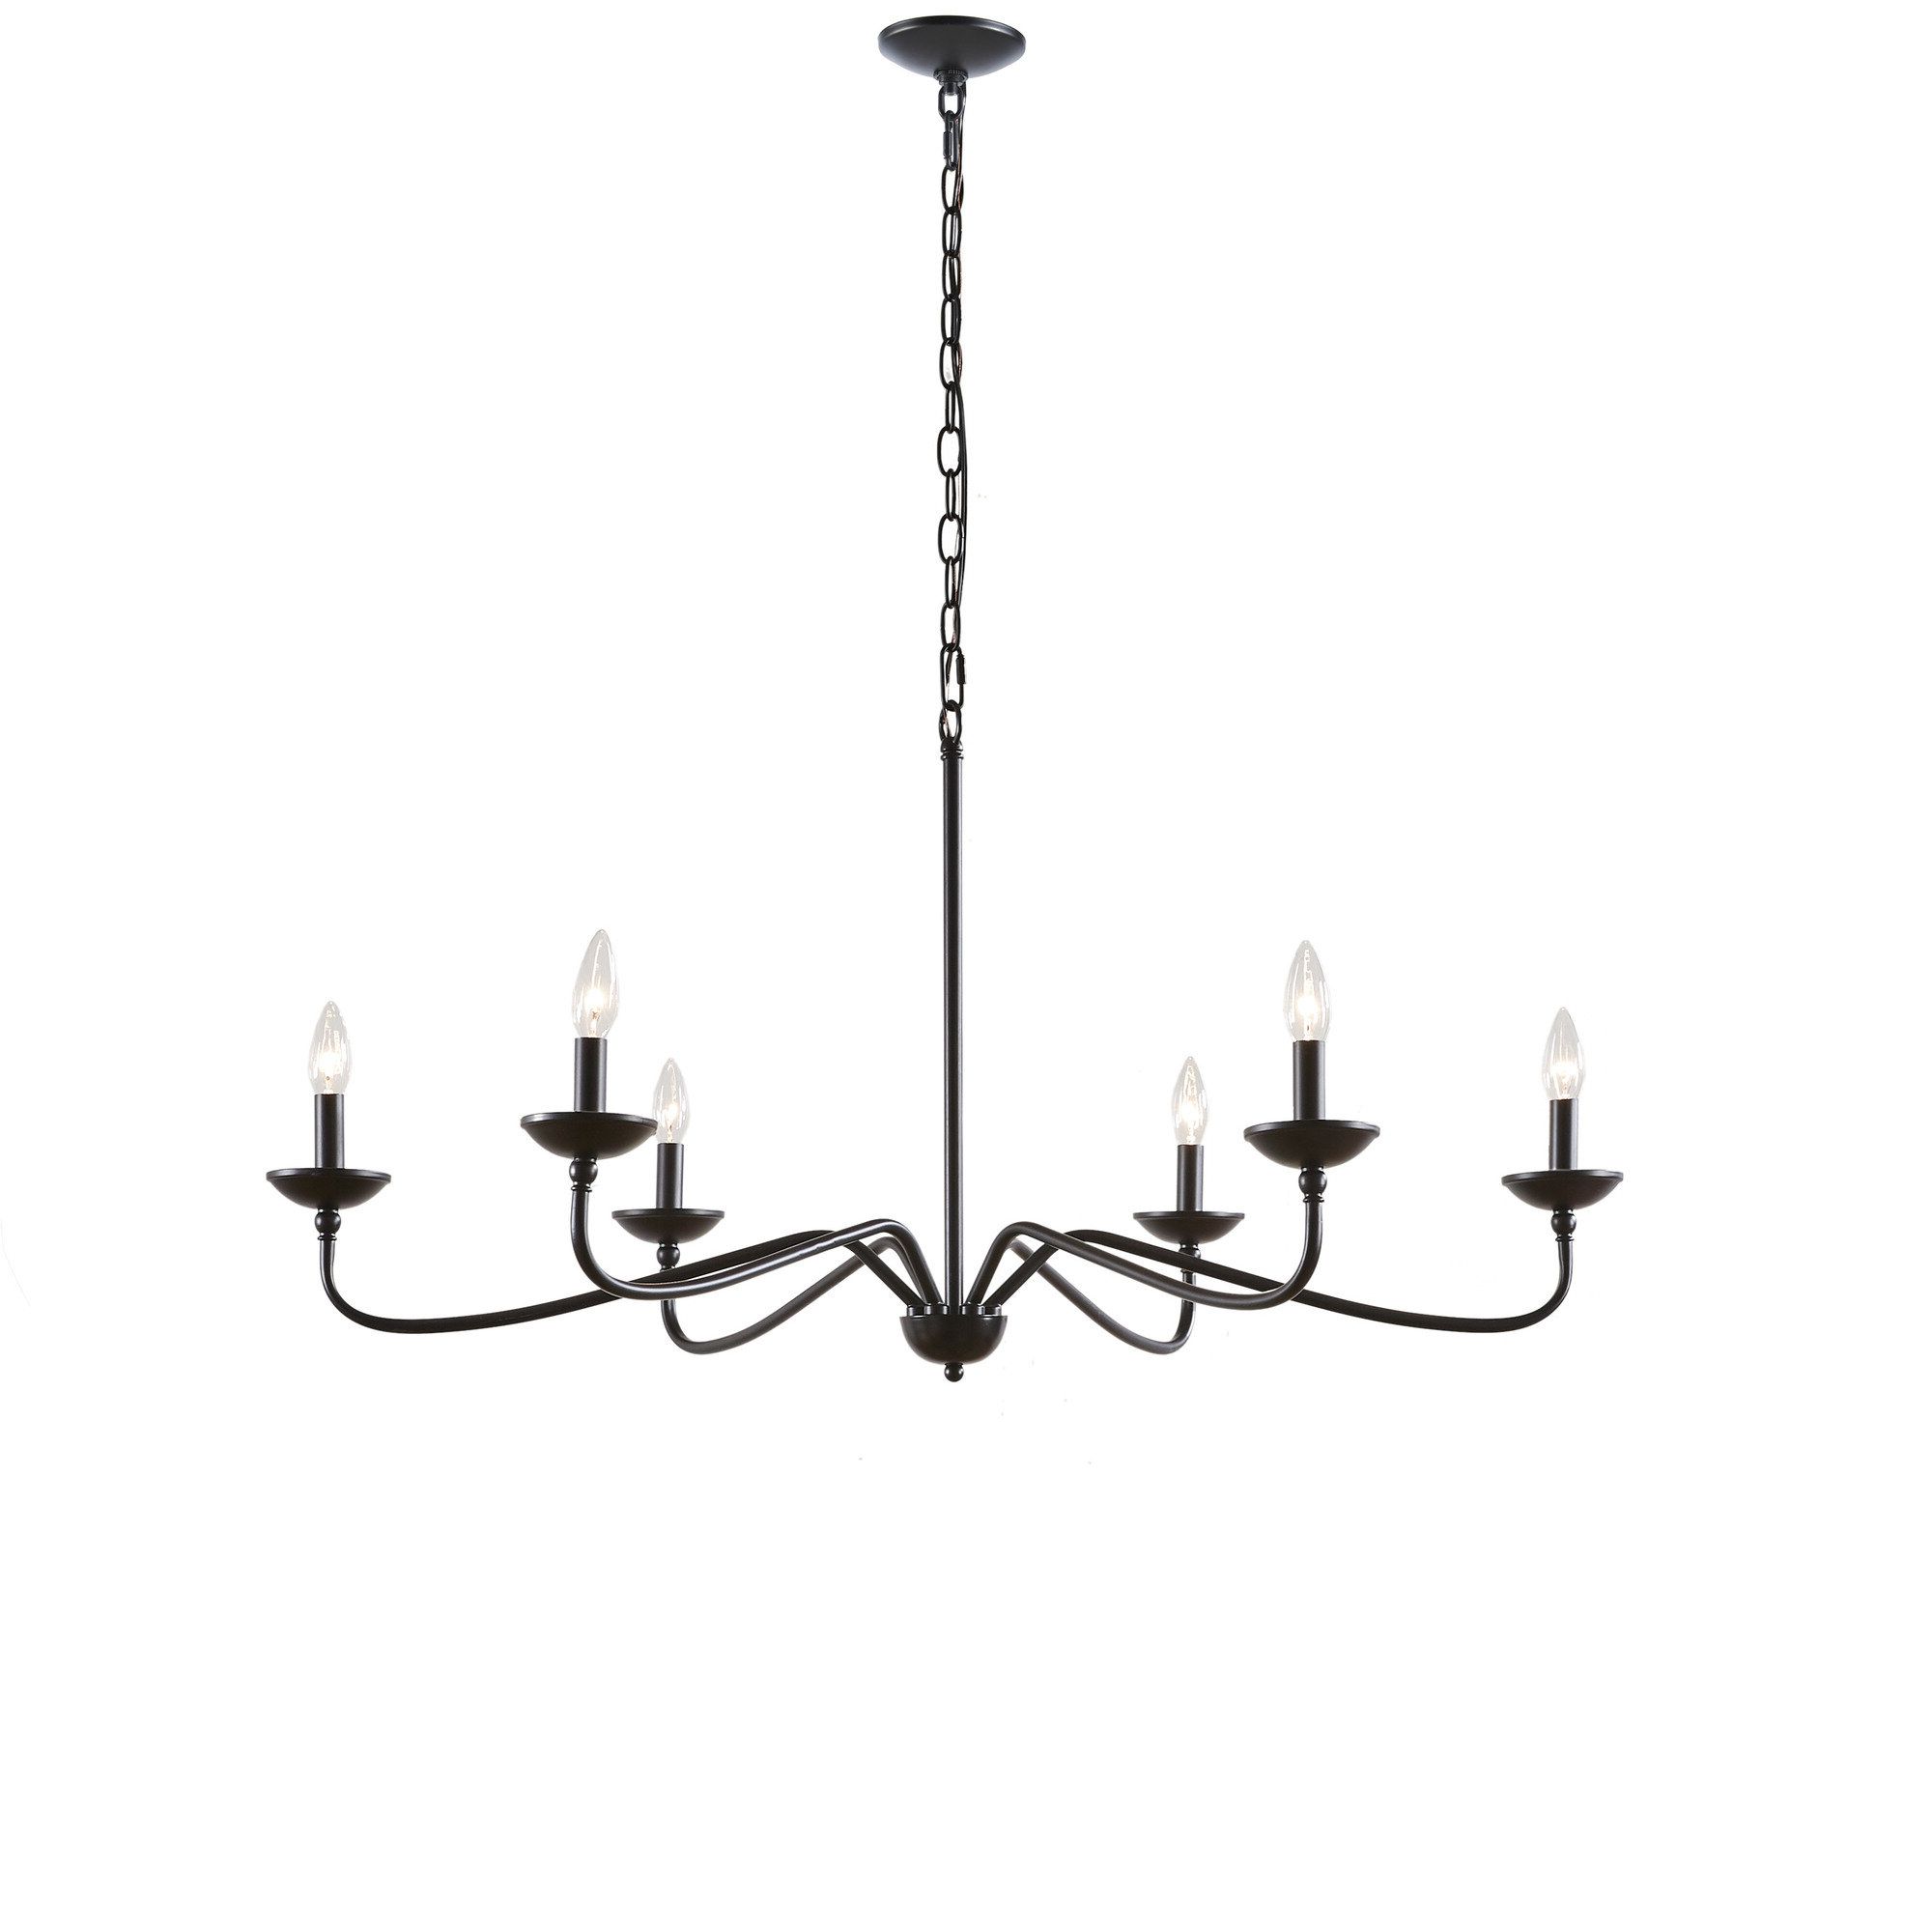 Best And Newest Scannell 6 Light Candle Style Chandelier With Perseus 6 Light Candle Style Chandeliers (View 12 of 25)